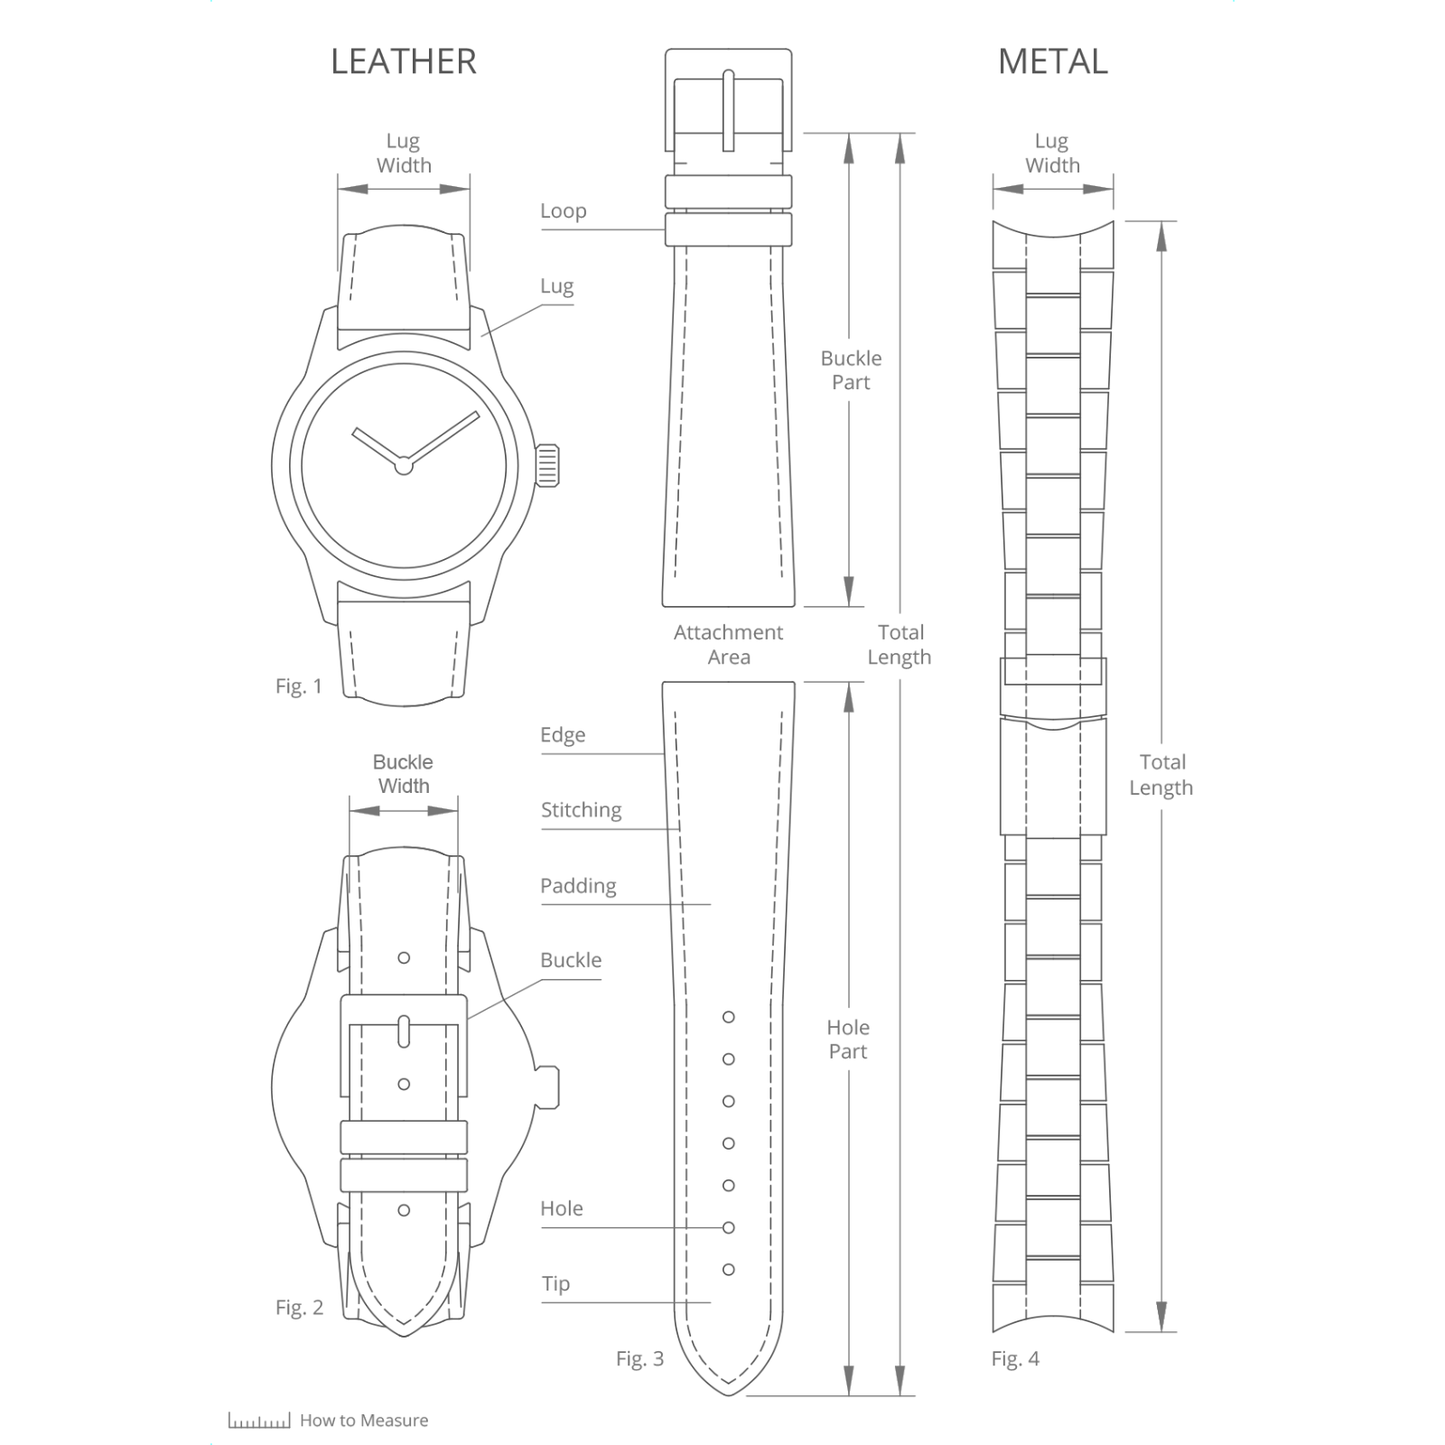 DBLACK [ACE] QUICK RELEASE, DUAL COLOR - NYLON WATCH STRAP // FOR 20MM, 22MM OR 24MM (CHOOSE YOUR SIZE & COLOR)